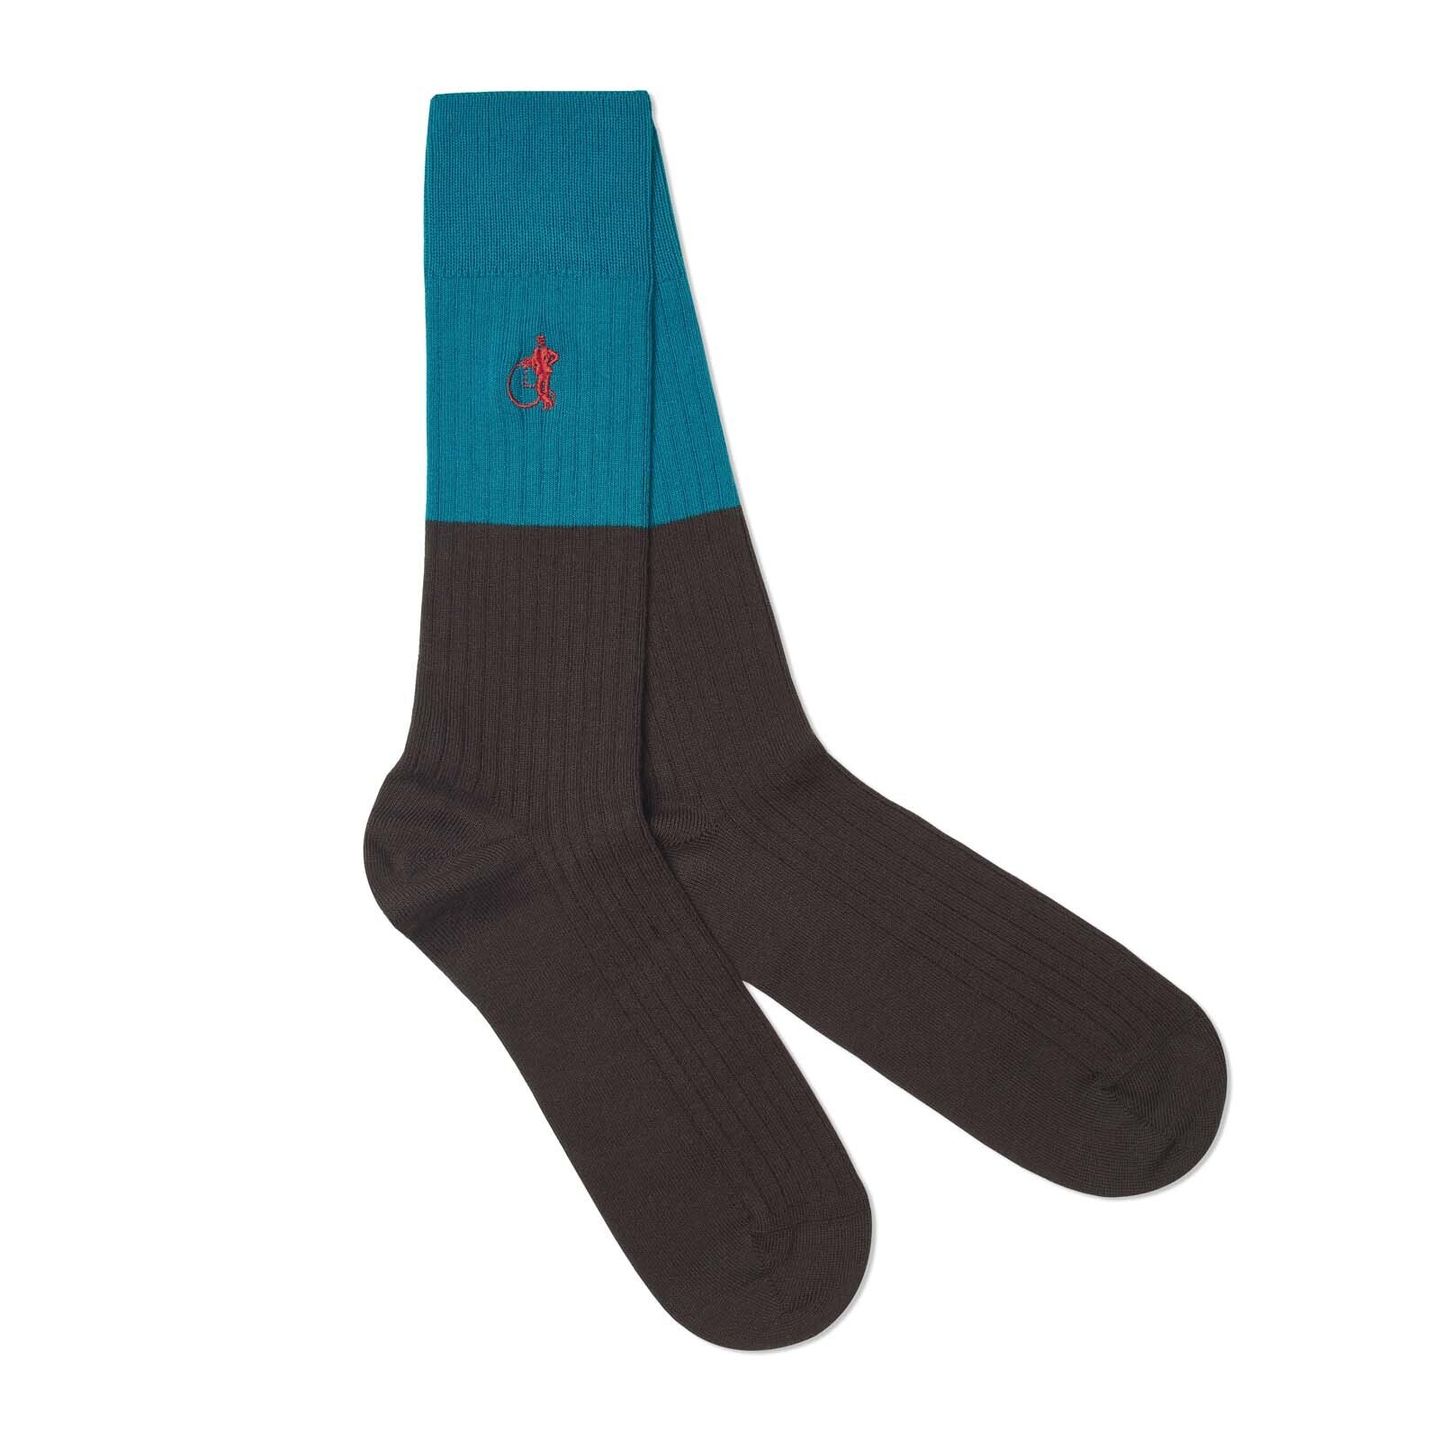 Socks that are light blue on the calf and a dark brown for the rest